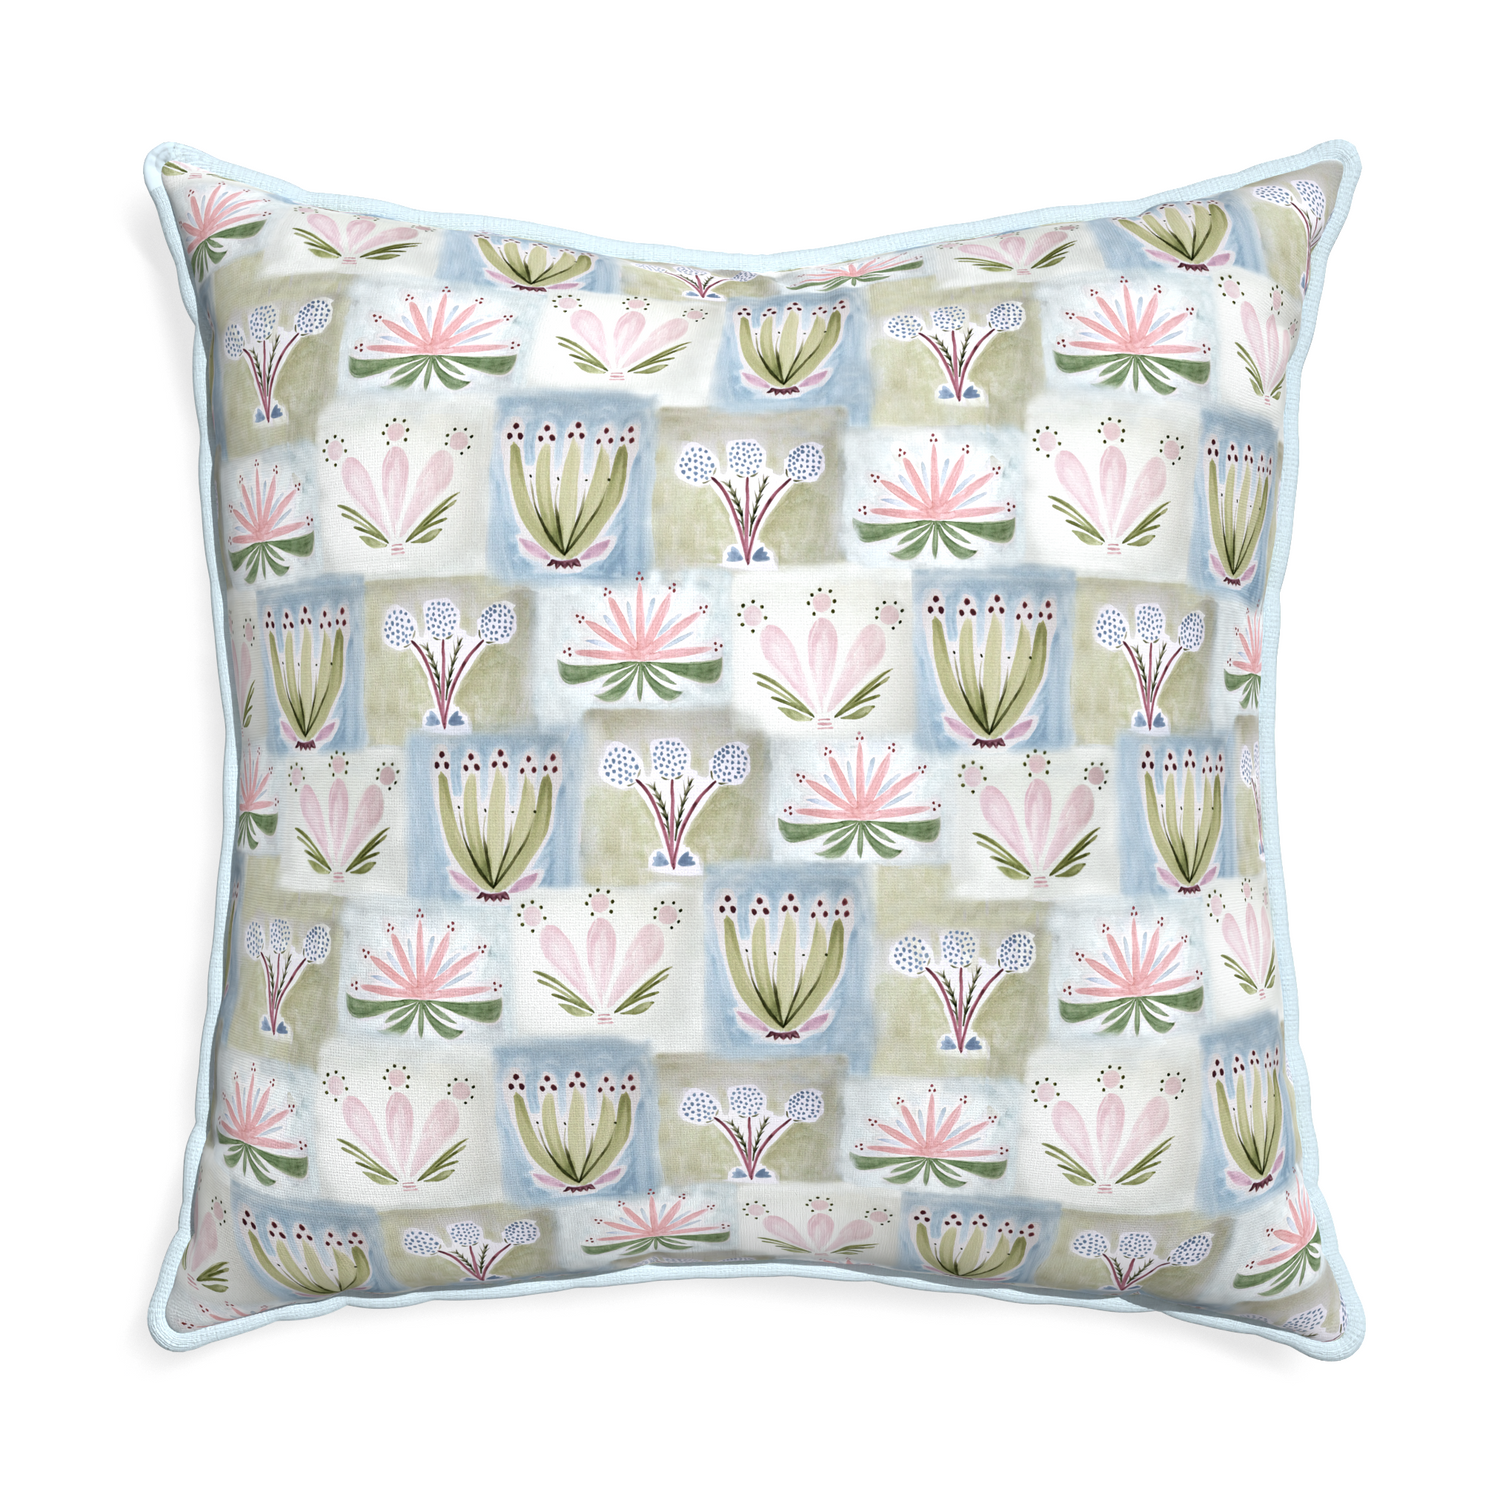 Euro-sham harper custom hand-painted floralpillow with powder piping on white background